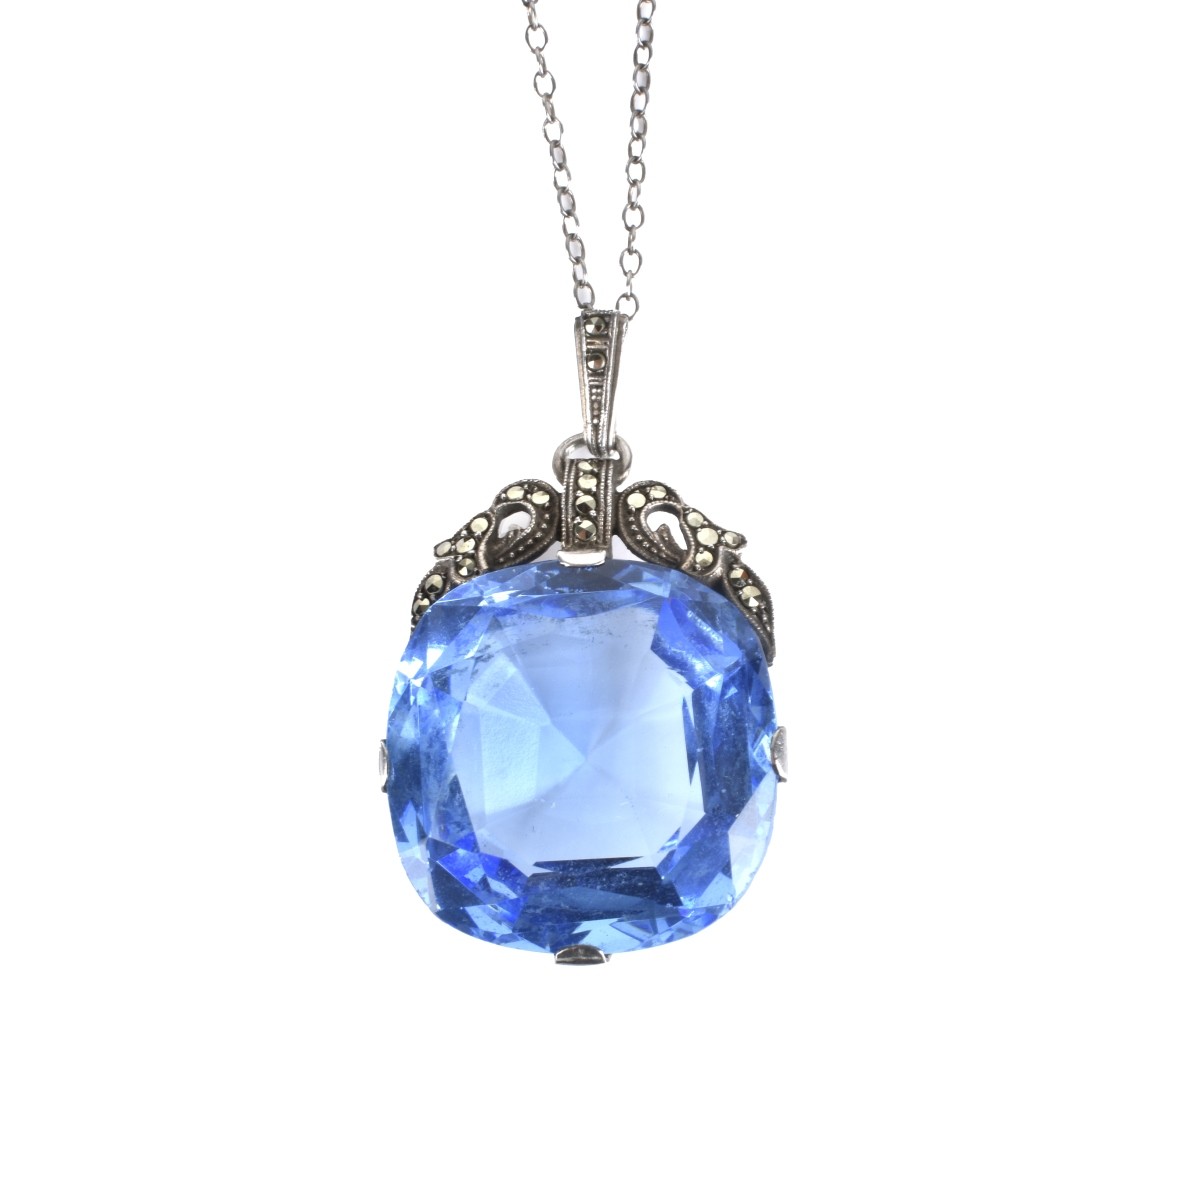 Blue Stone and Silver Pendant Necklace